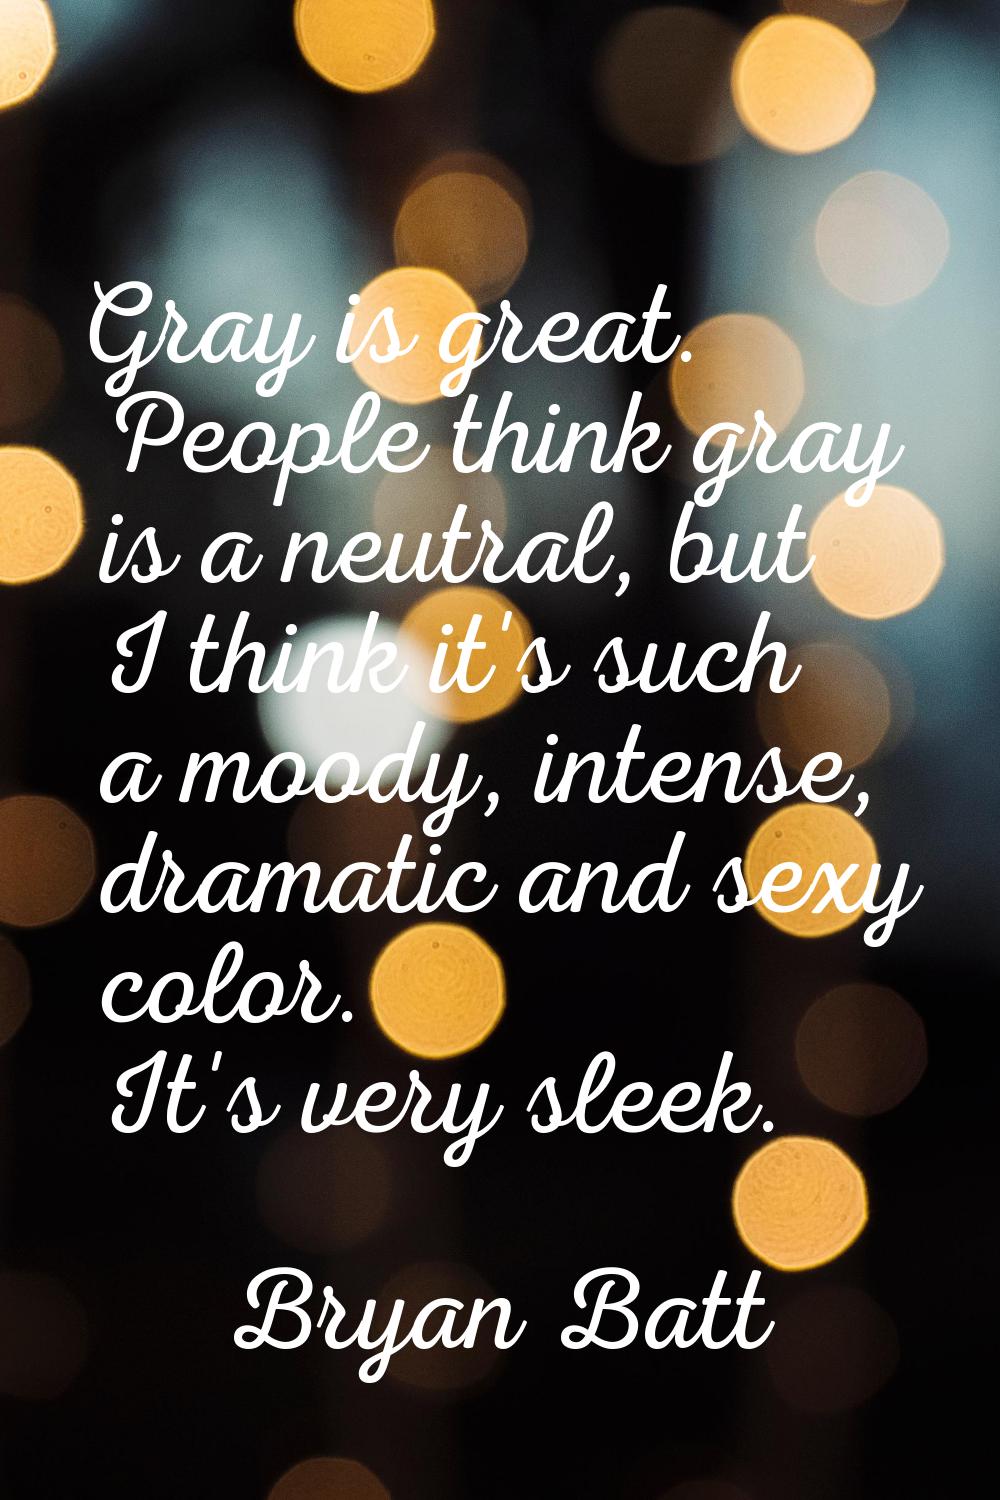 Gray is great. People think gray is a neutral, but I think it's such a moody, intense, dramatic and